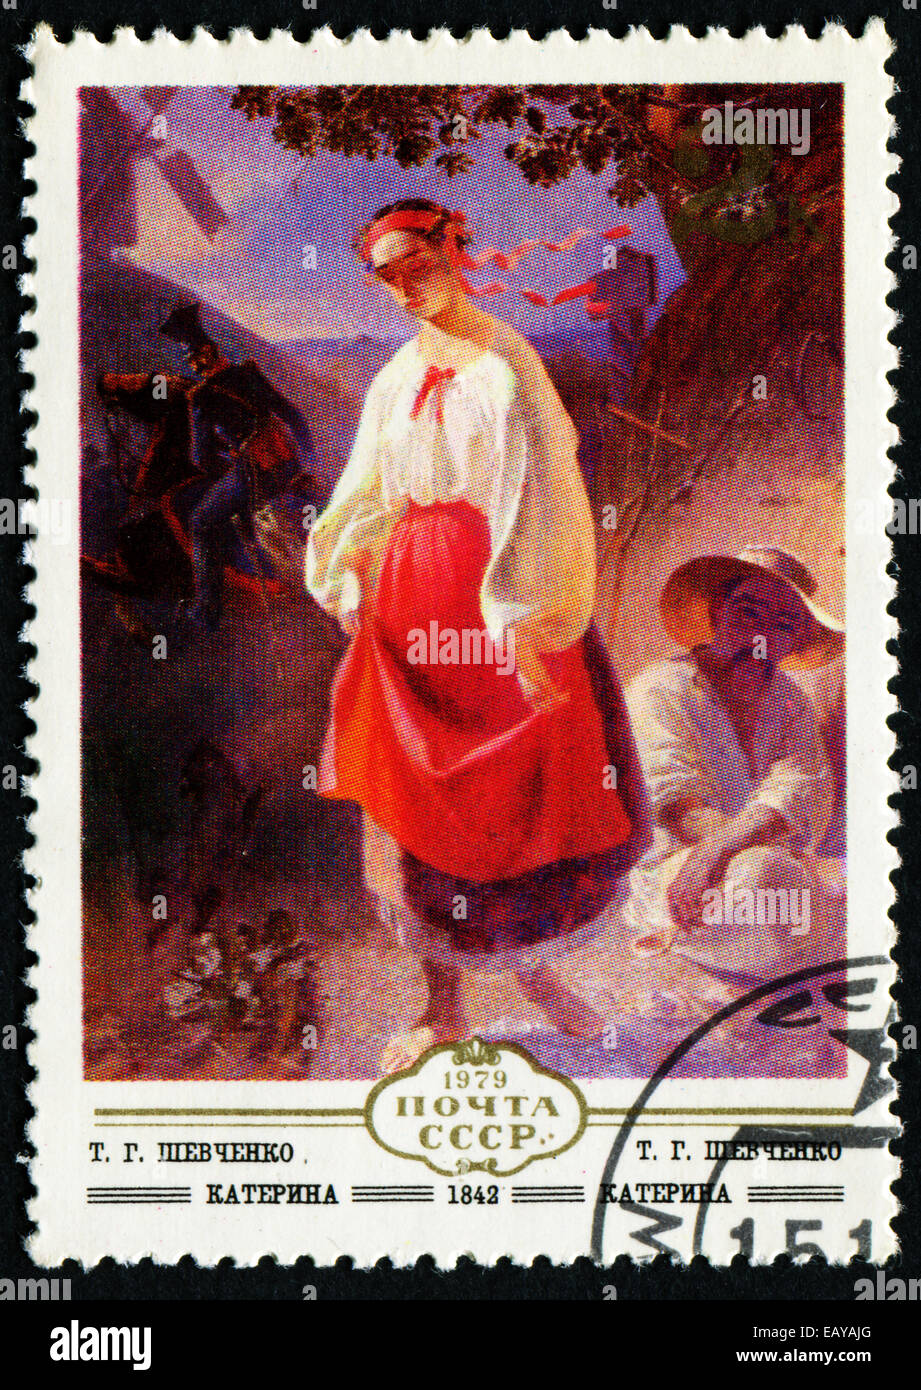 USSR - CIRCA 1979: A postage stamp printed in the USSR shows Taras Shevchenko painting Katerina, circa 1979 Stock Photo